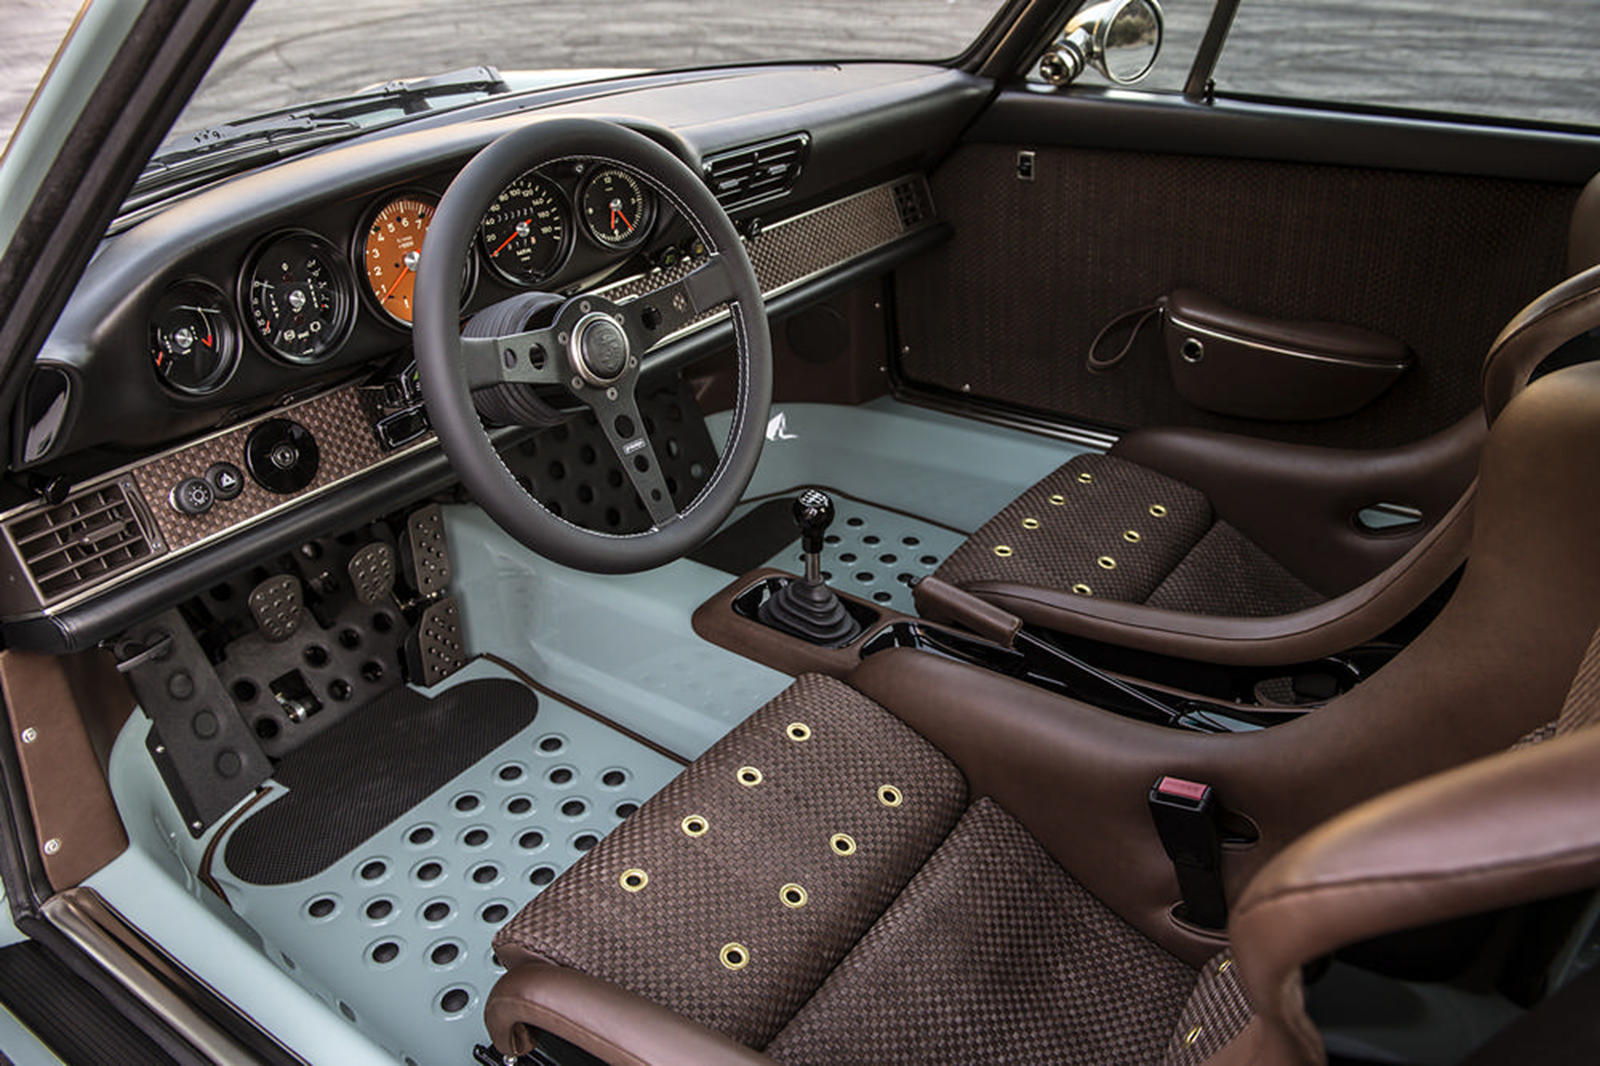 New Tech in Old Cars: Upgrading with a Custom Car Interior